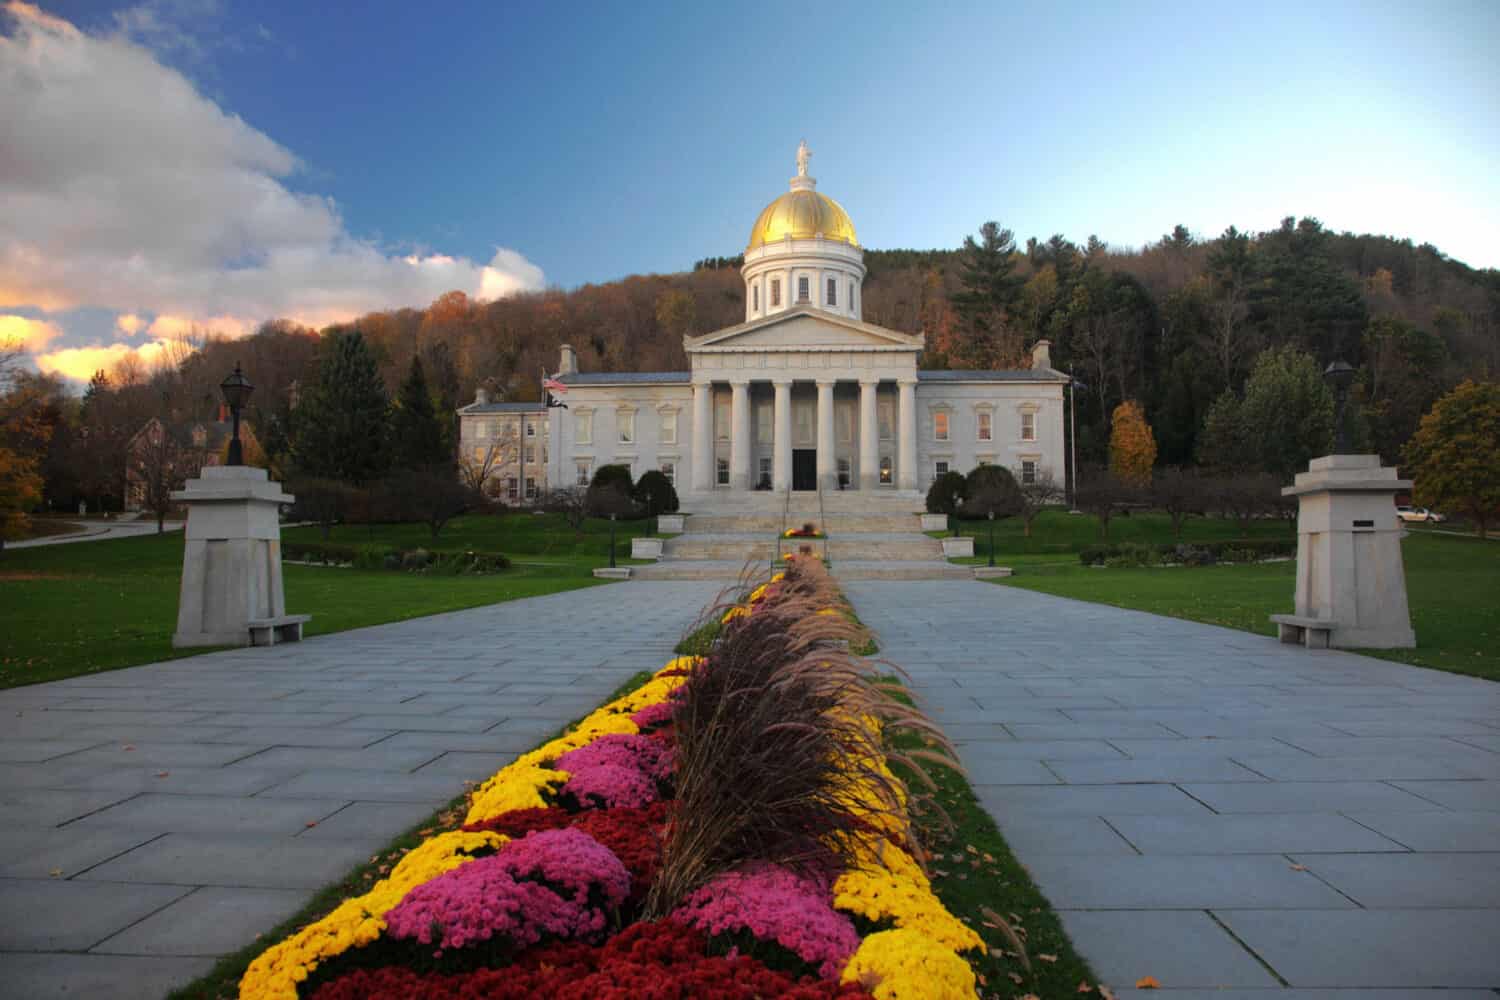 Vermont State House in fall at sunset, Montpelier, VT